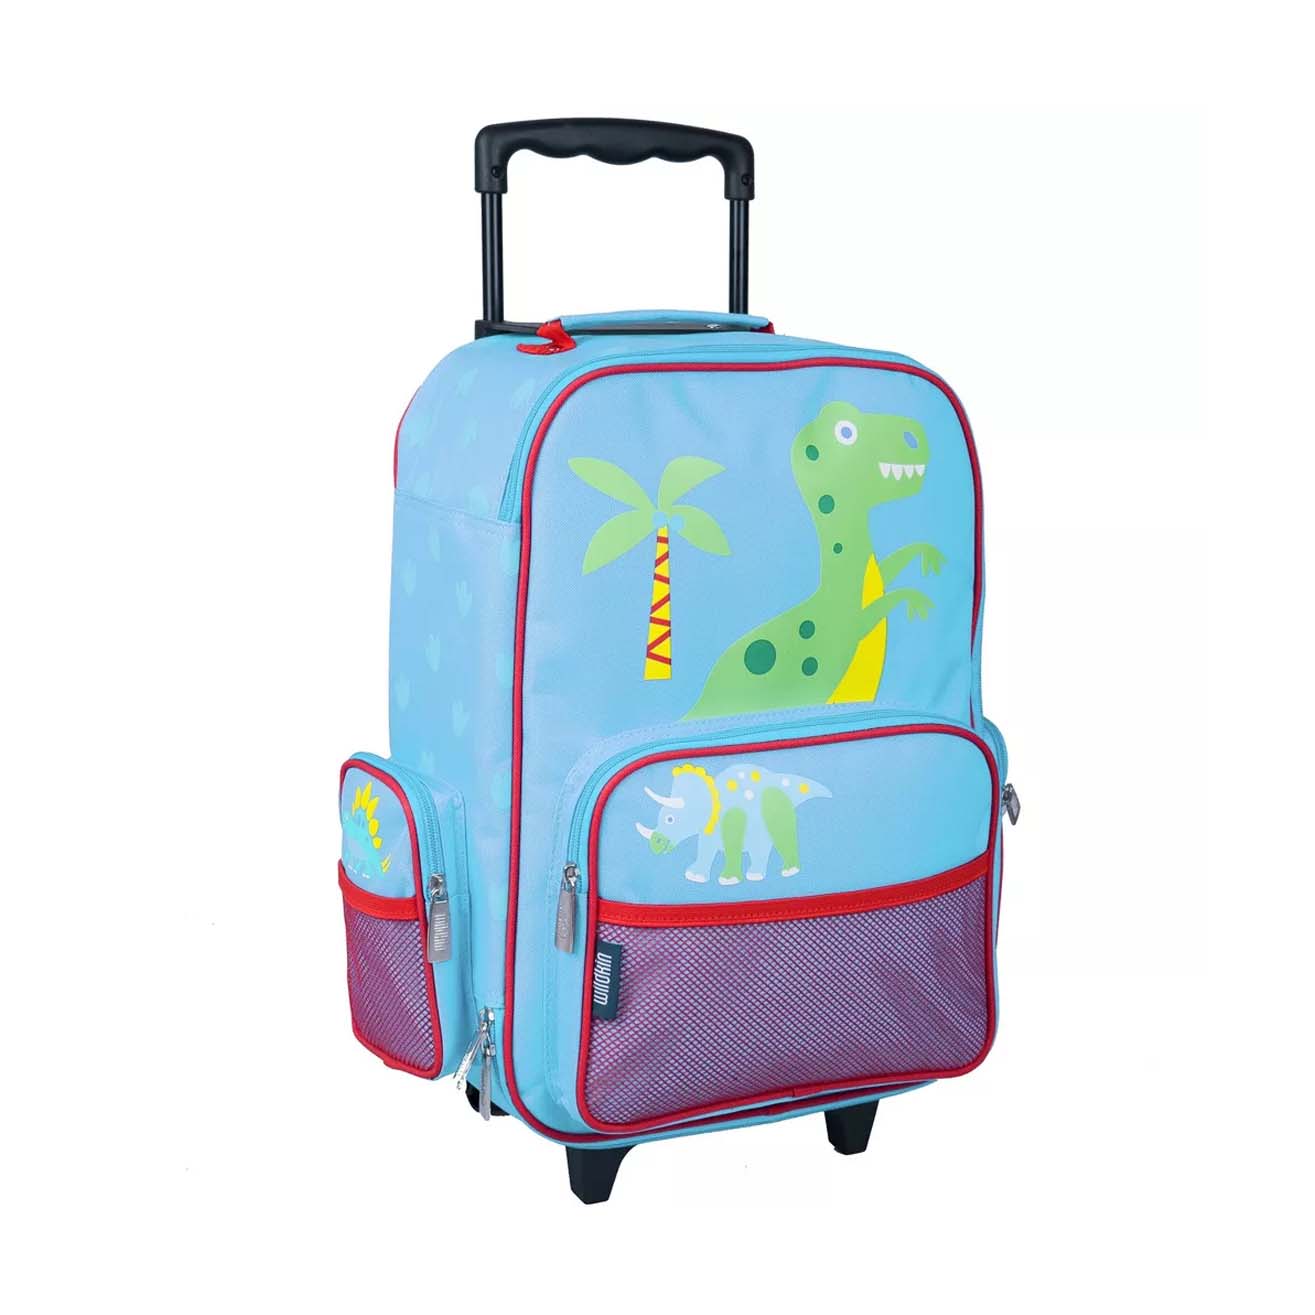 Wildkin Kids Rolling Suitcase in blue and red with dinosaur design and black handle